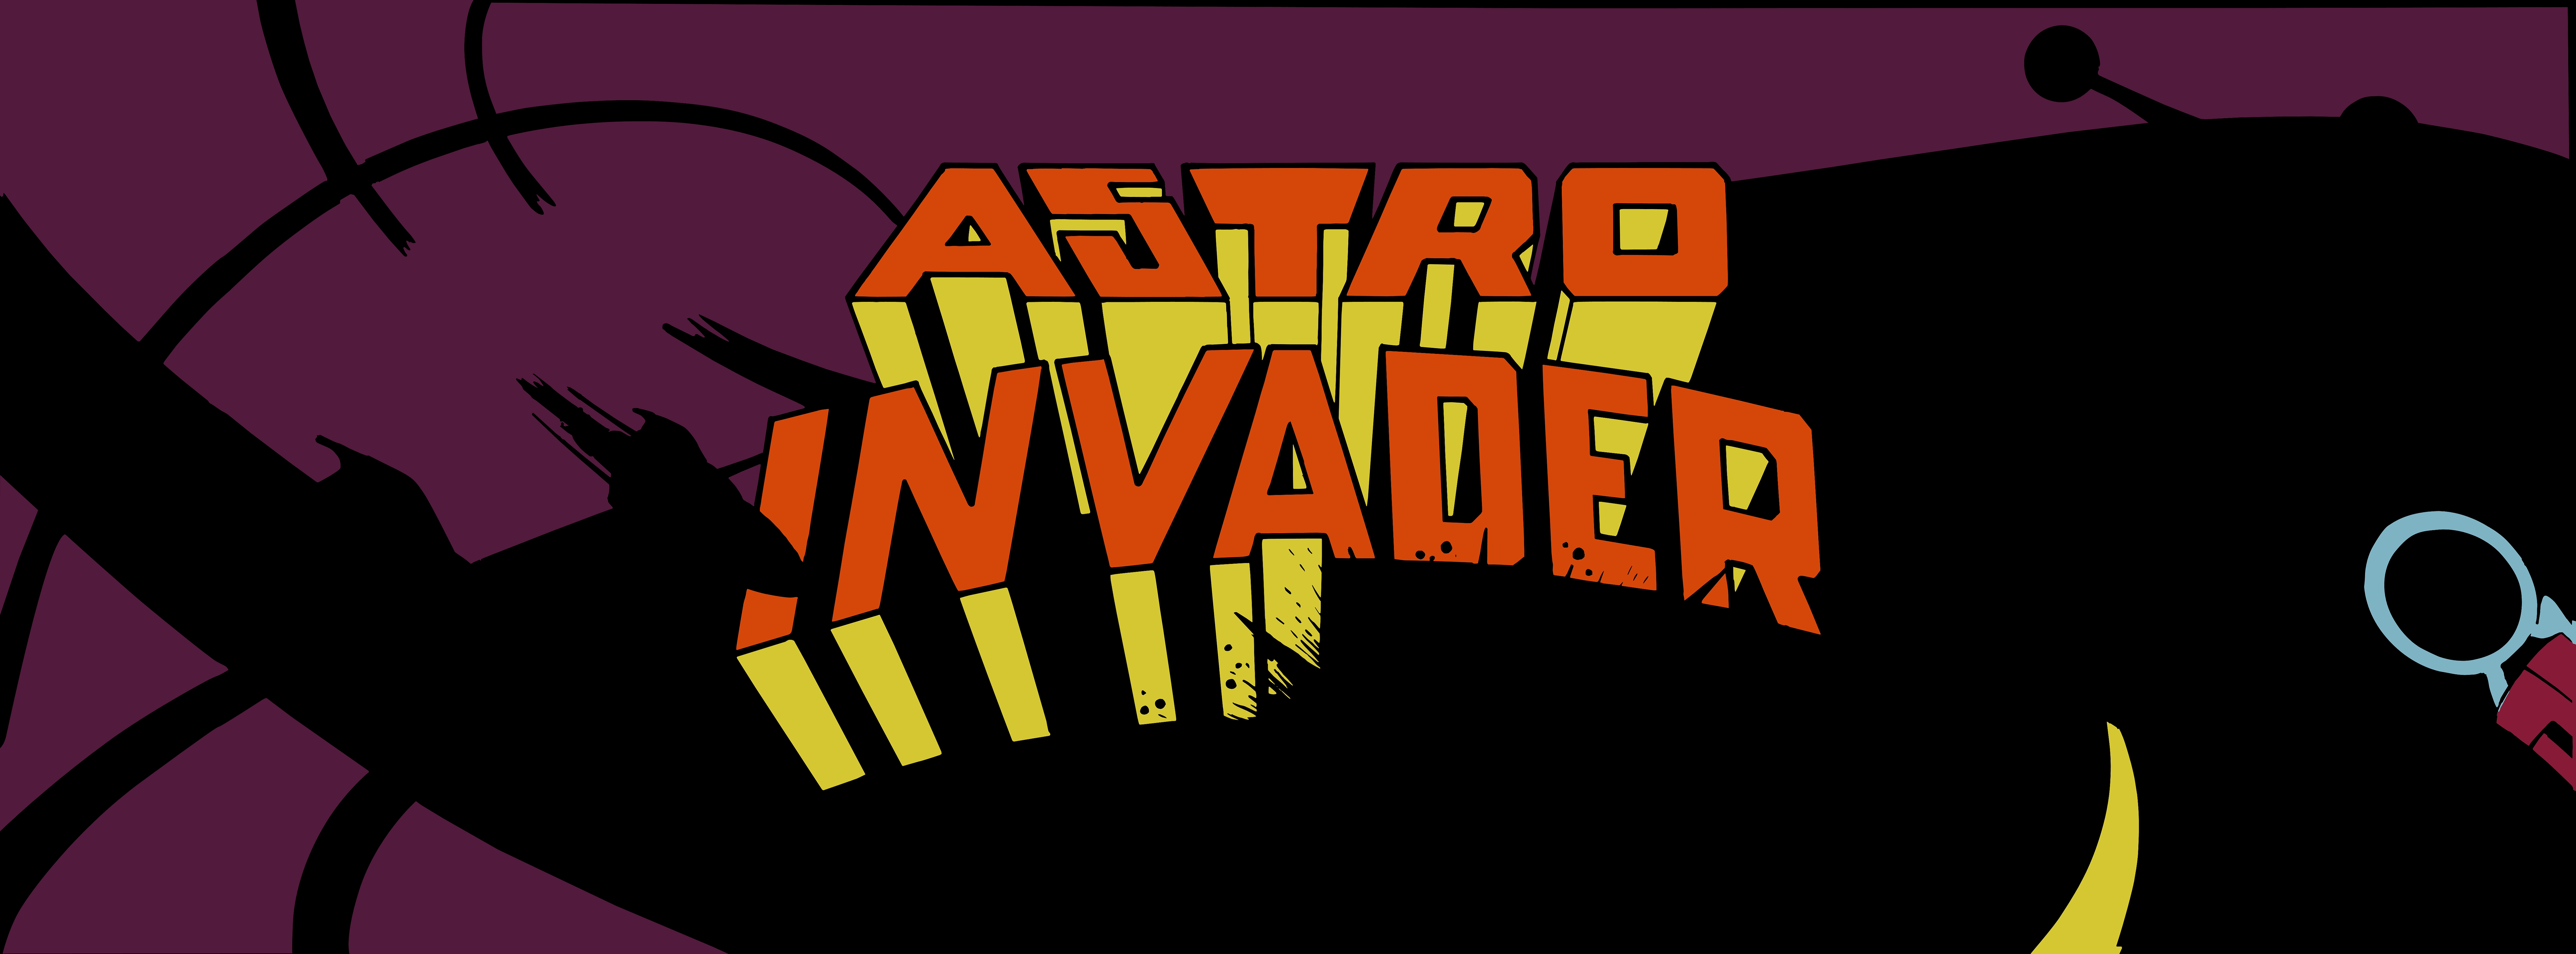 Video Game Astro Invader HD Wallpaper | Background Image